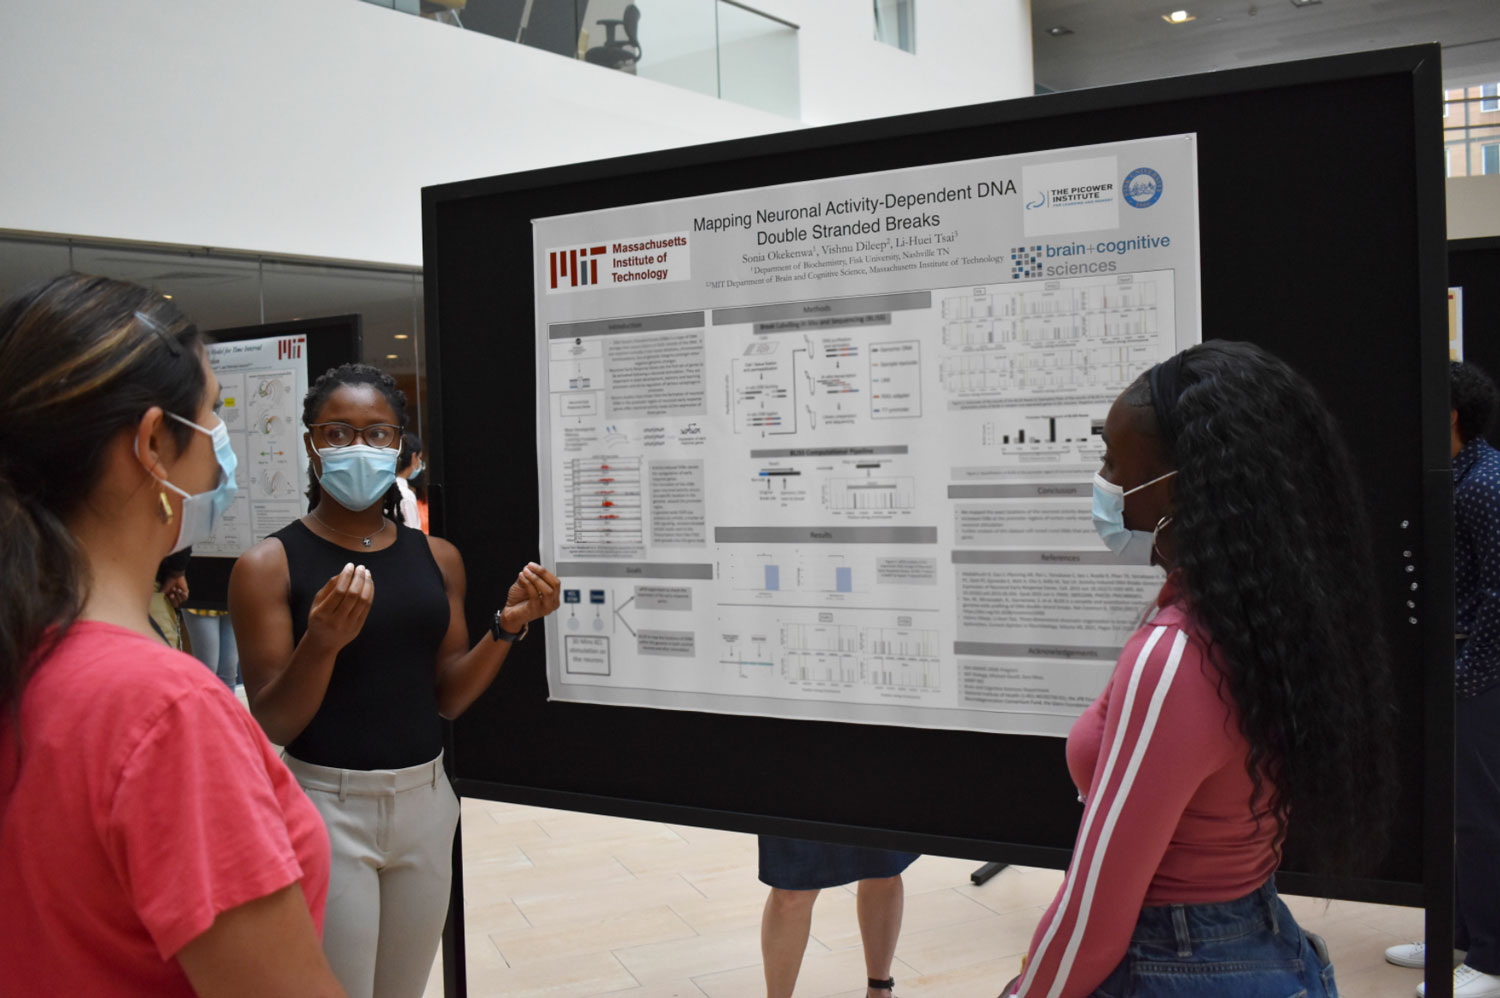 Summer students thrive in Picower labs